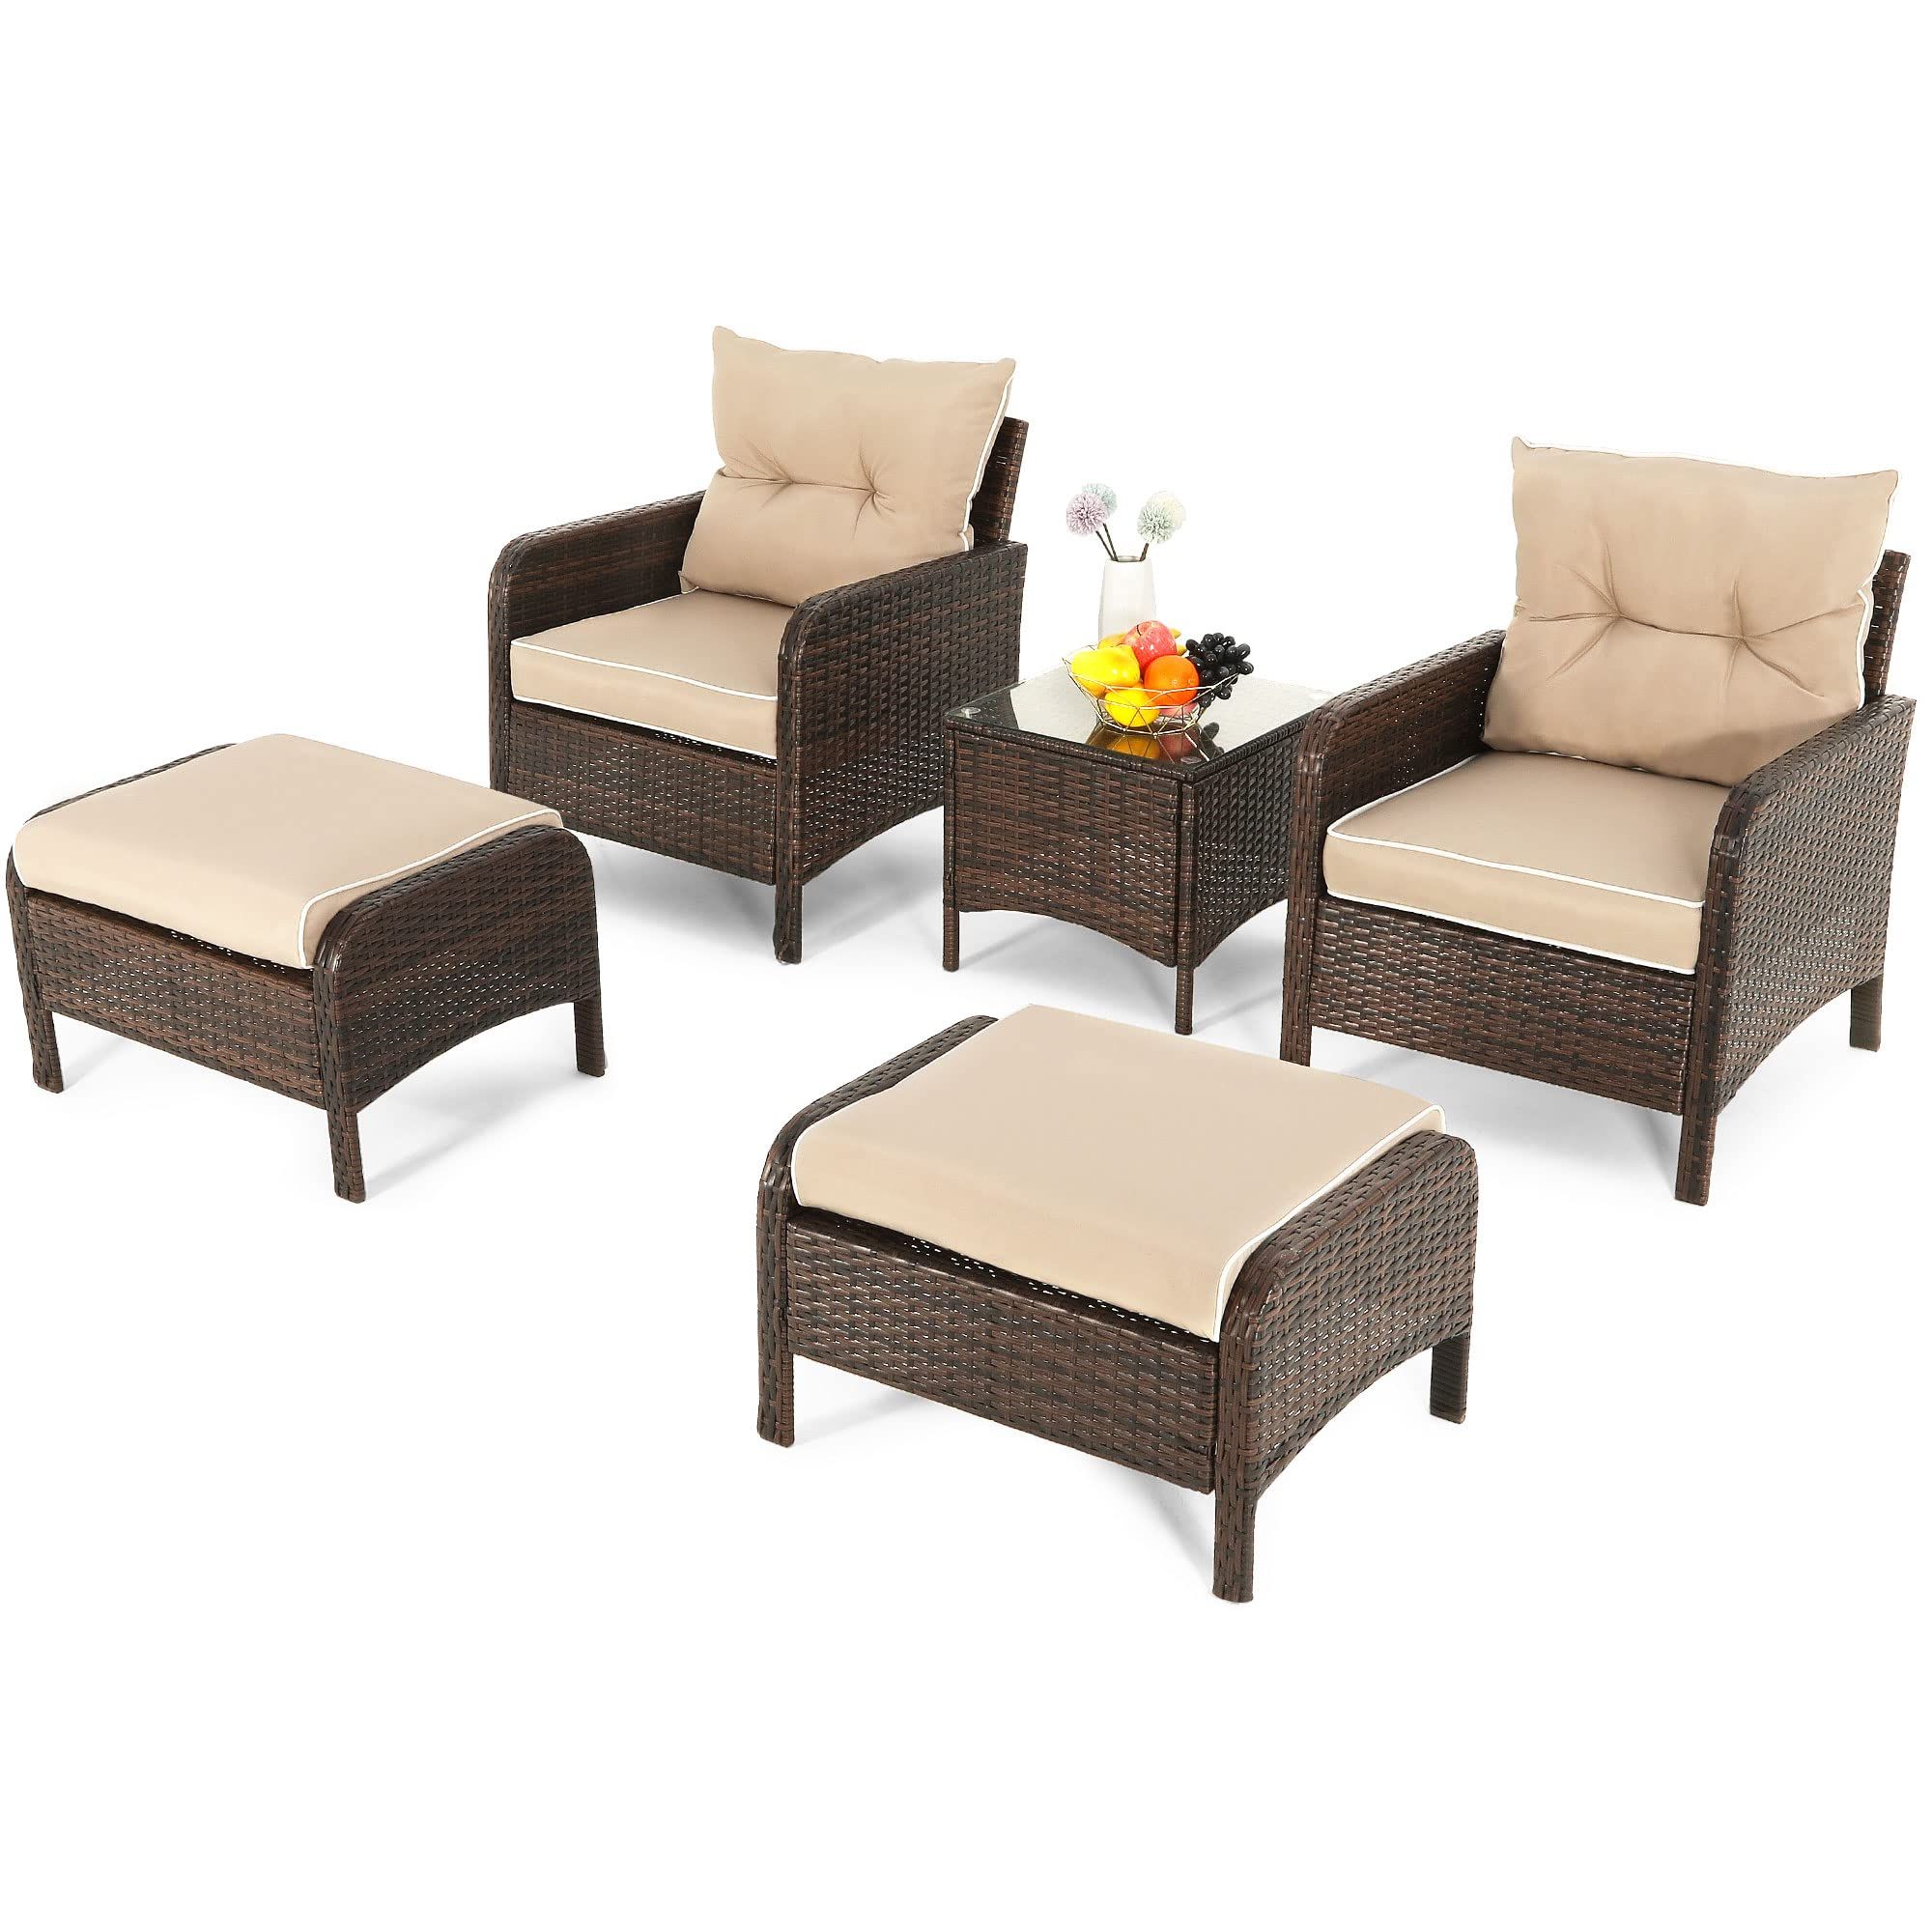 Brown Wicker Chairs With Ottoman Intended For Trendy Amazon: Yitahome 5 Piece Wicker Patio Furniture Set, Patio Set Porch Furniture  Outdoor Lounge Chair With Ottoman And Side Table, Brown : Patio, Lawn &  Garden (View 4 of 15)